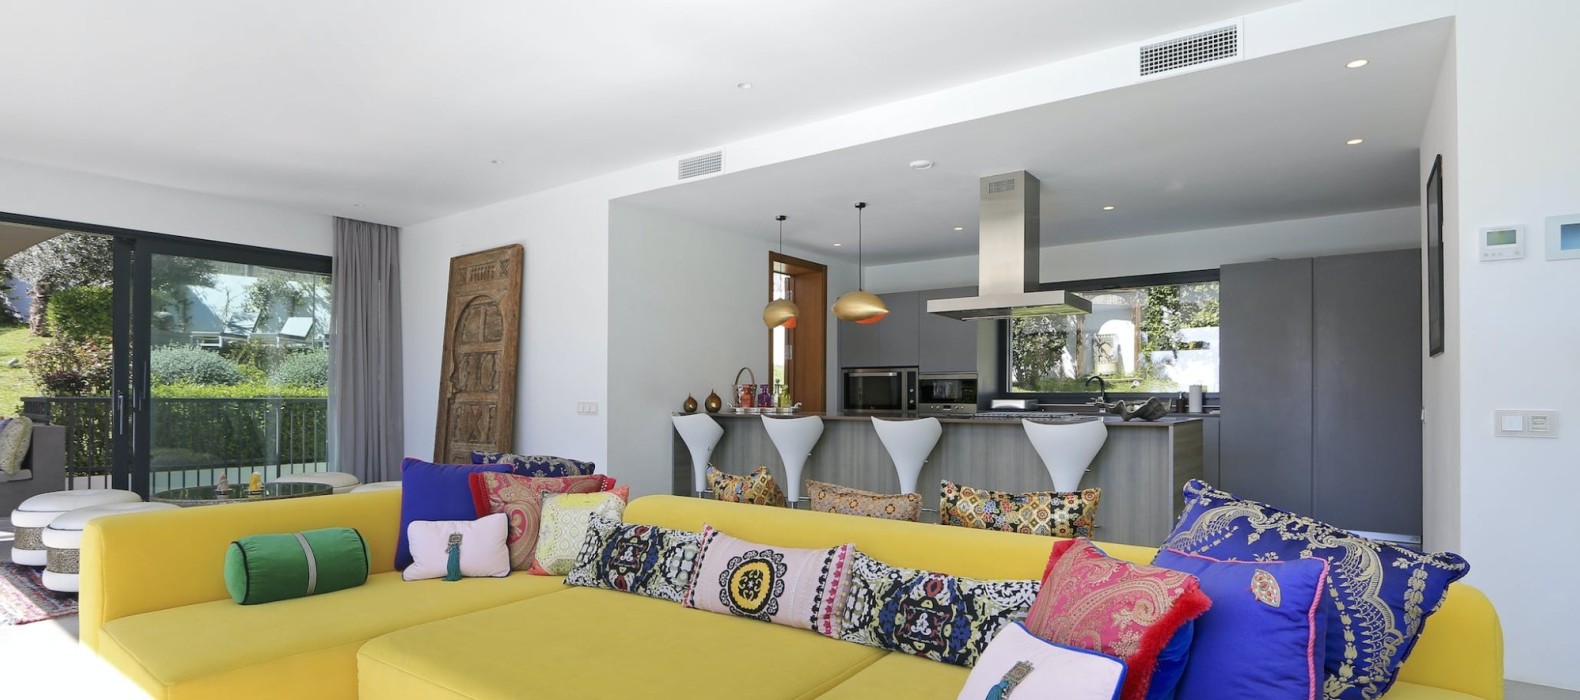 Living room and open kitchen of Villa Love and Light in Ibiza